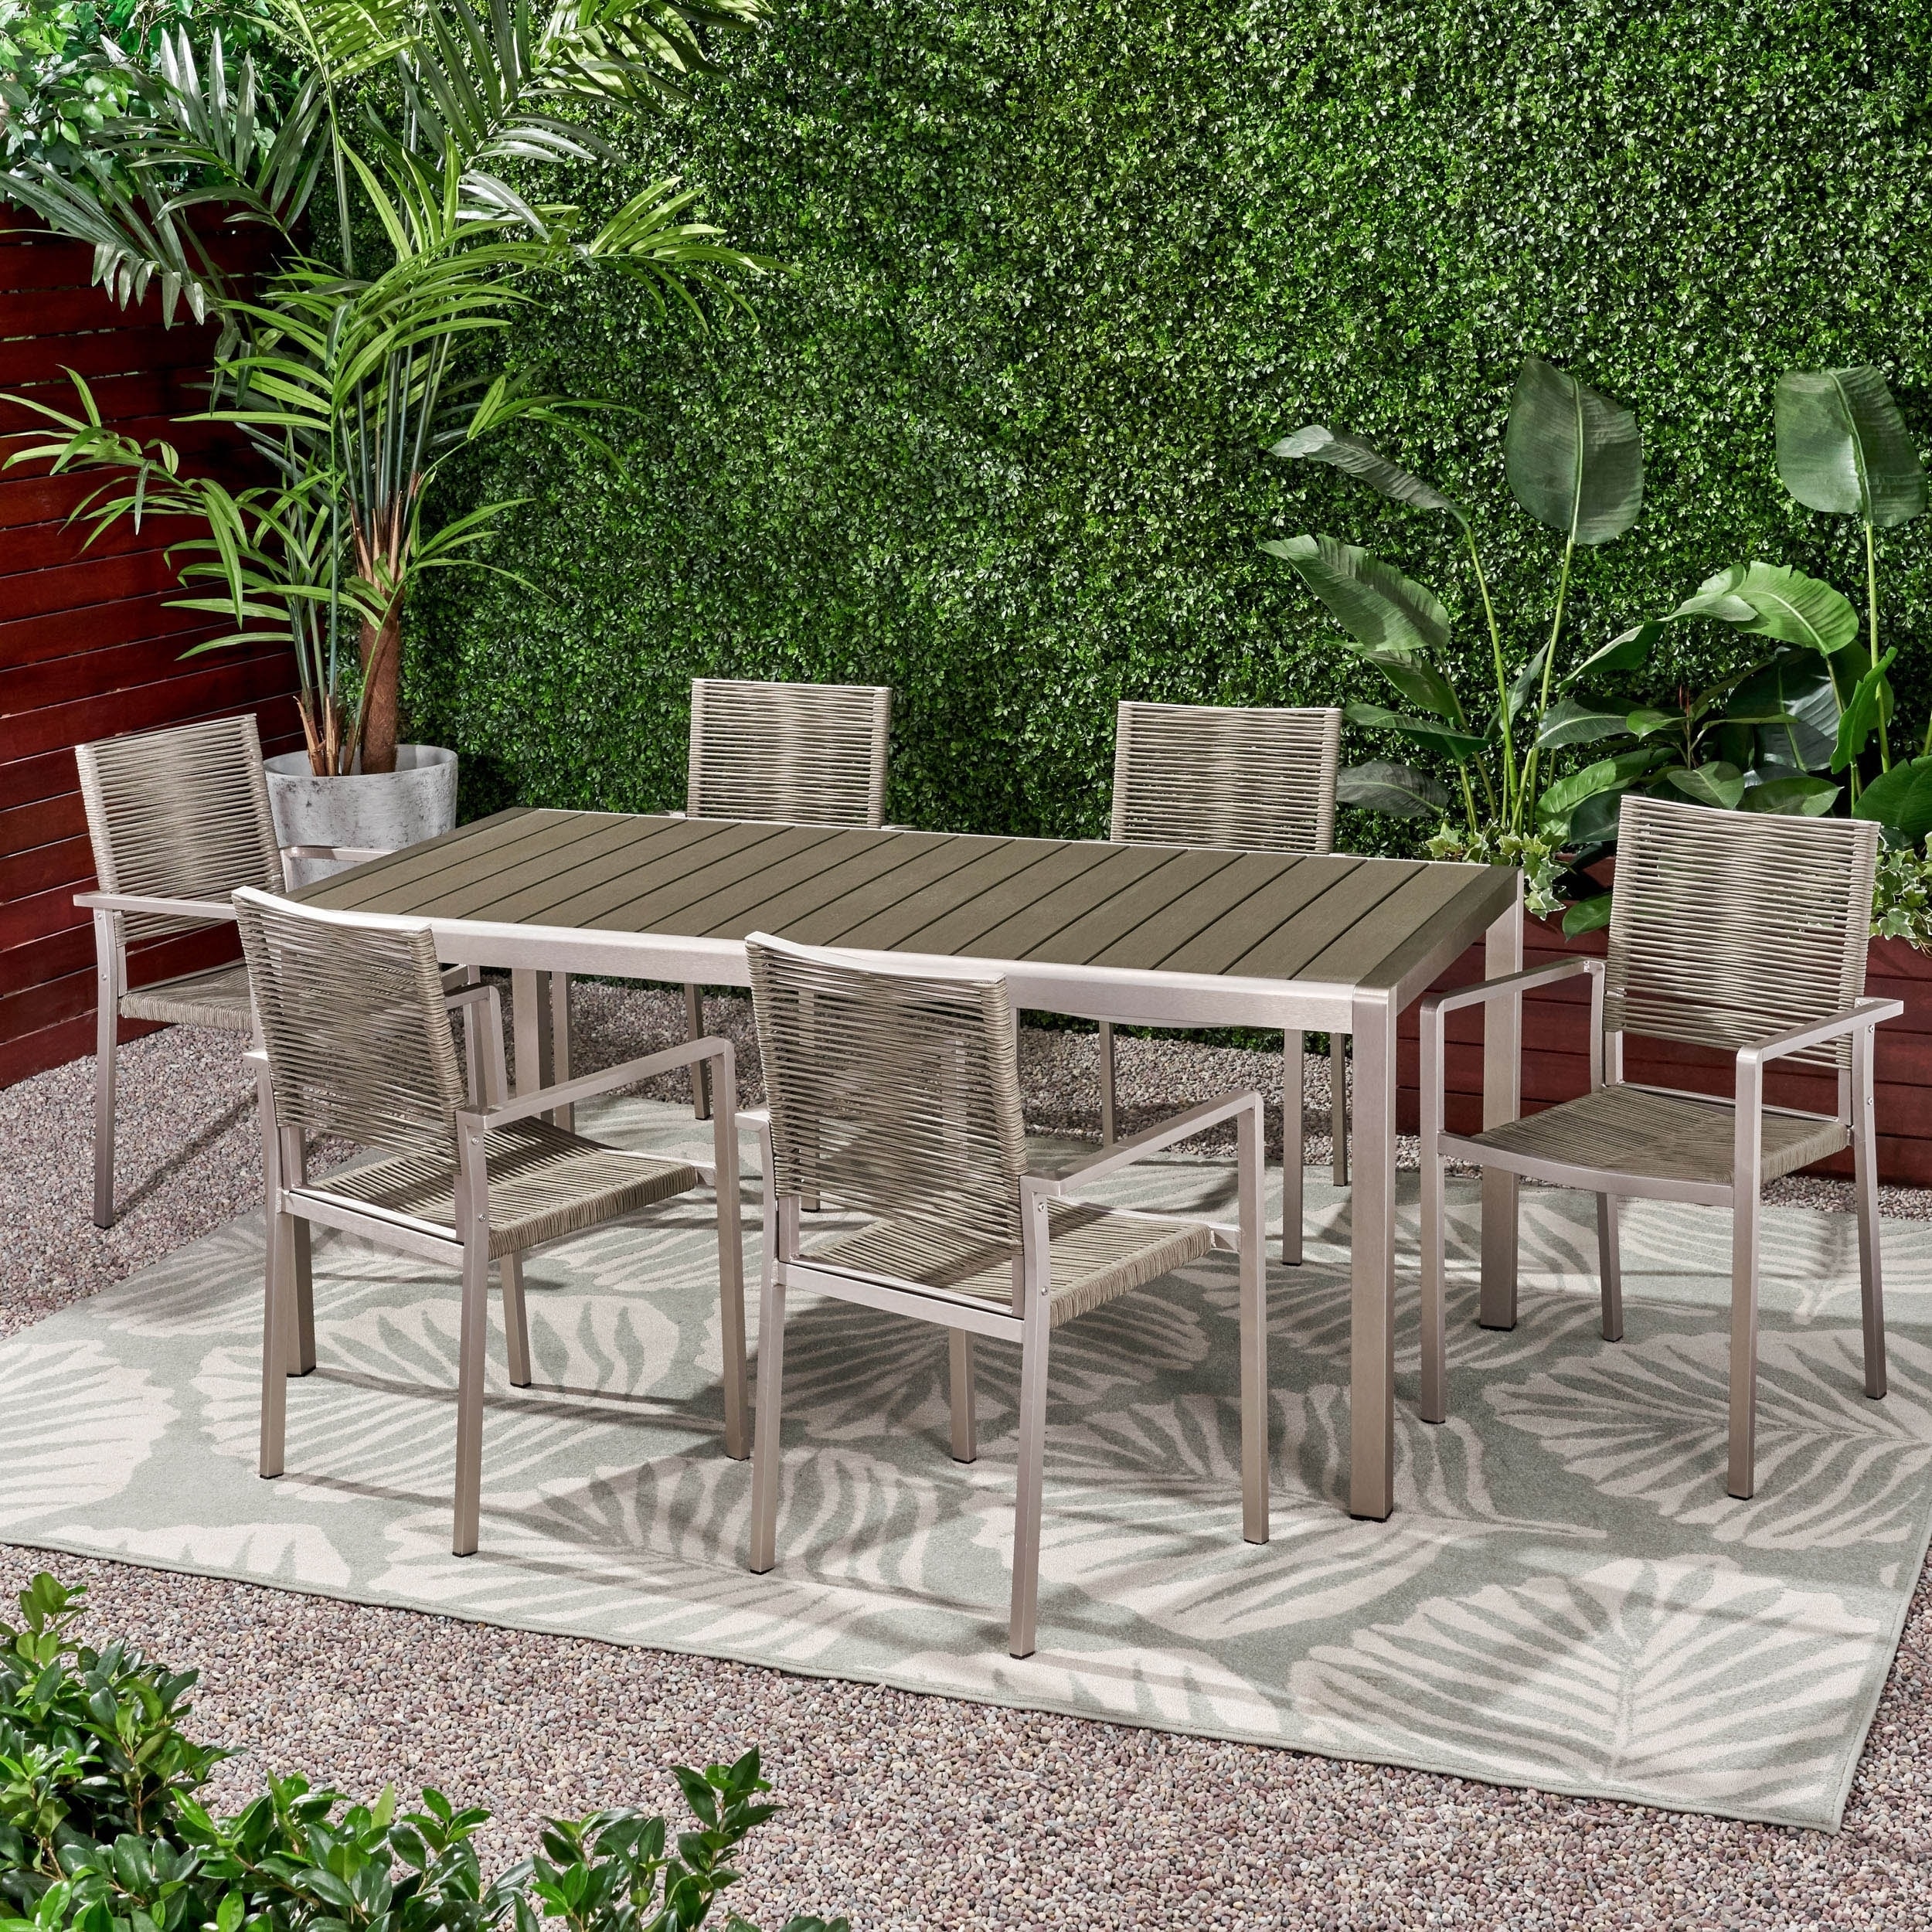 Lapis Outdoor Modern 6 Seater Aluminum Dining Set With Wicker Table Top By Christopher Knight Home